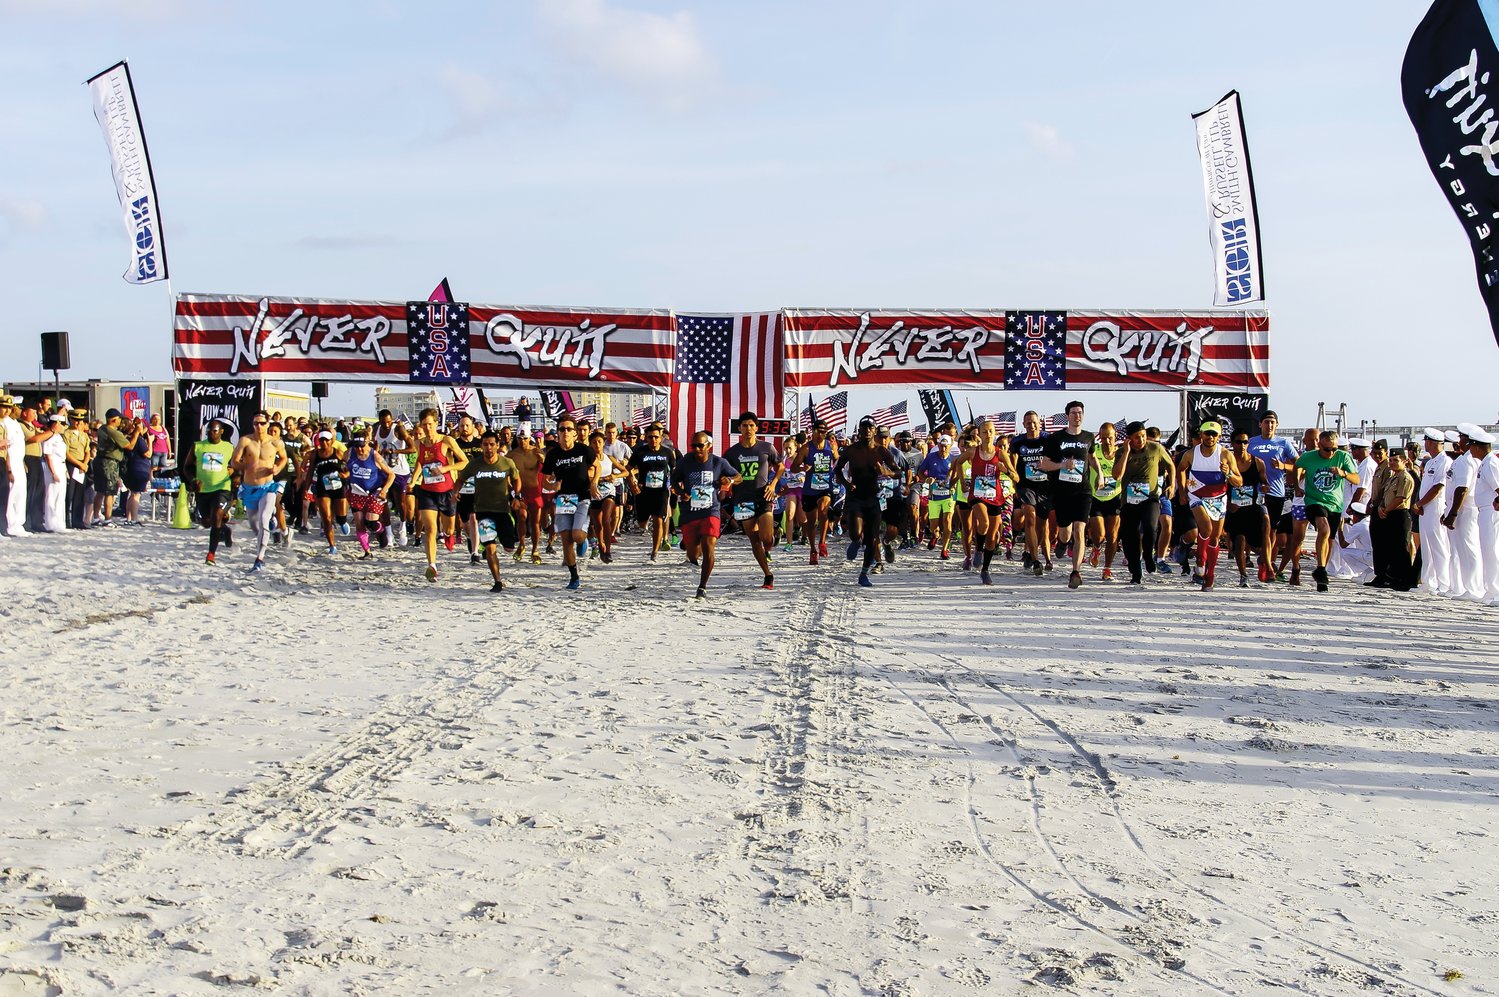 At one point during its 12 years, the Never Quit Run became the largest beach run in history.